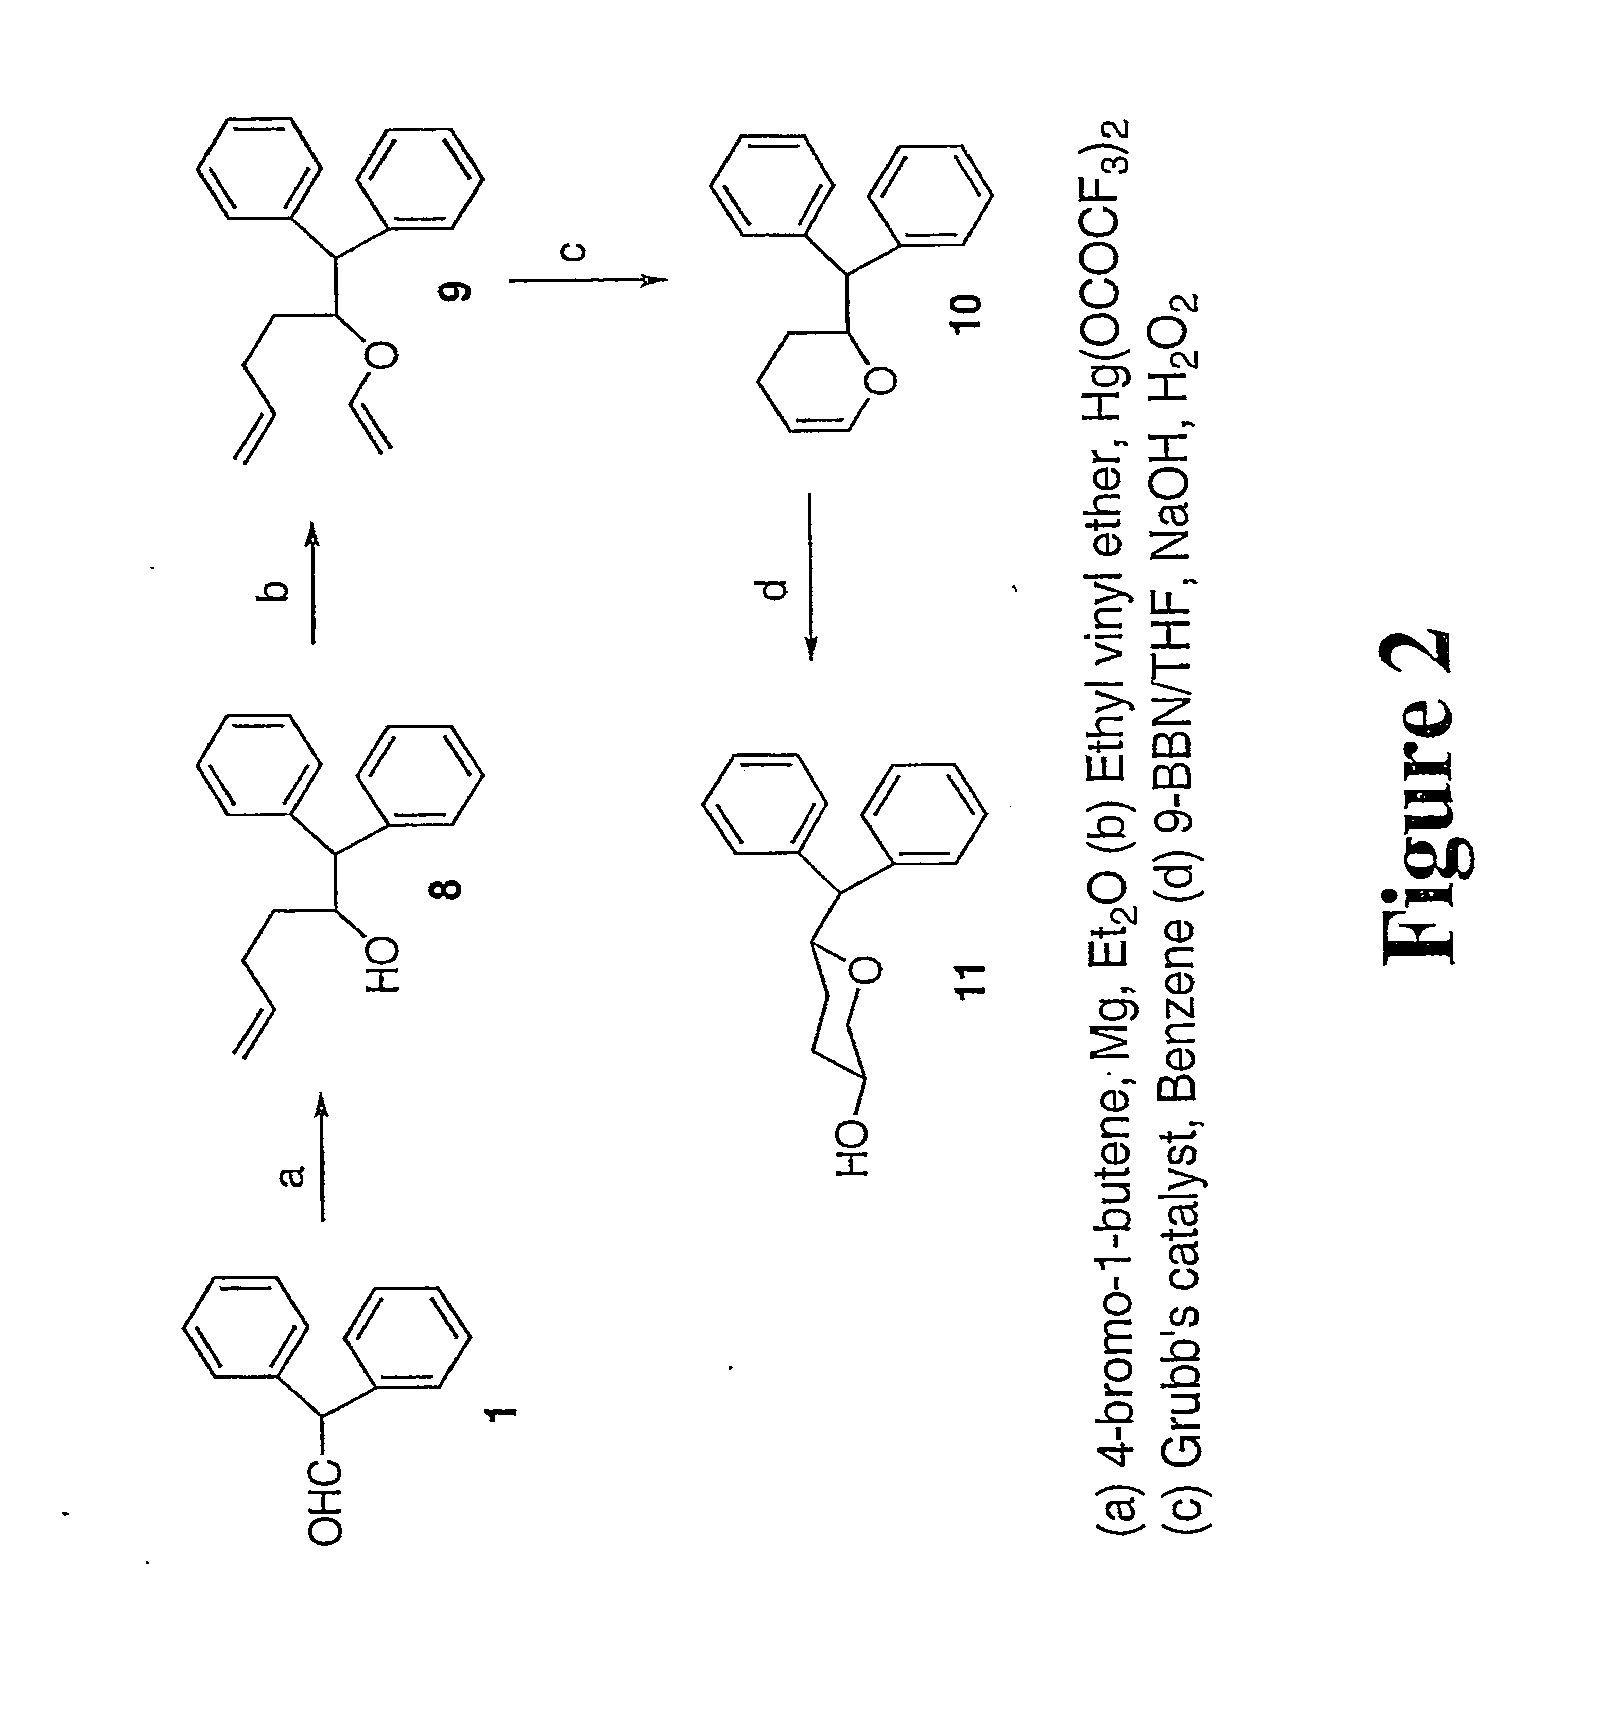 Tri-substituted 2-benzhydryl-5-benzylamino-tetrahydro-pyran-4-ol and 6-benzhydryl-4-benzylamino-tetrahydro-pyran-3-ol analogues, and novel 3,6-disbustituted pyran derivatives